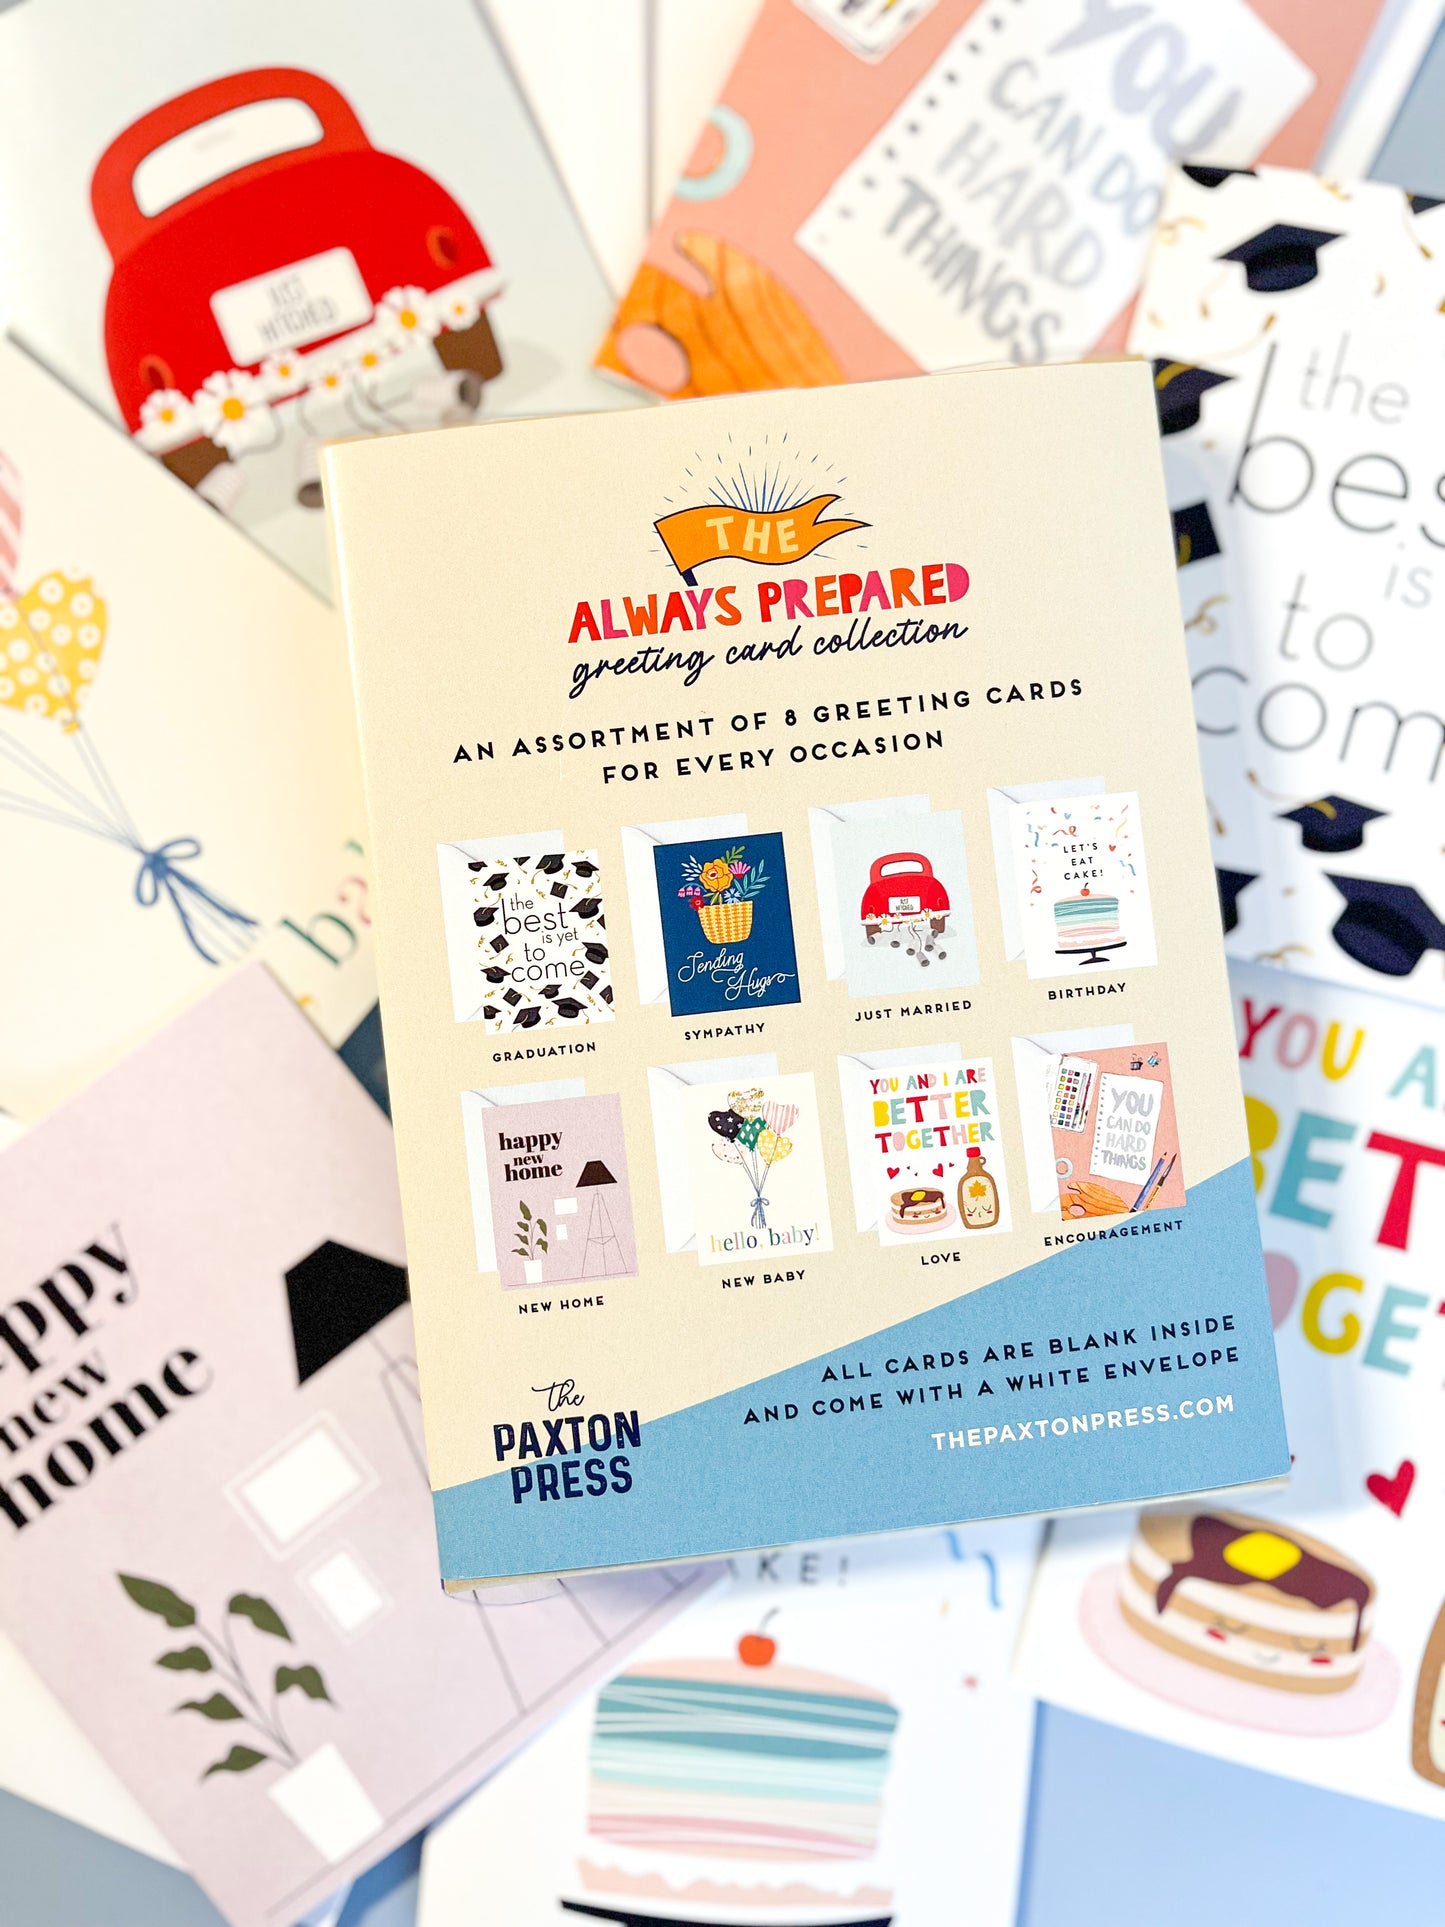 The "Always Prepared" Greeting Card Collection